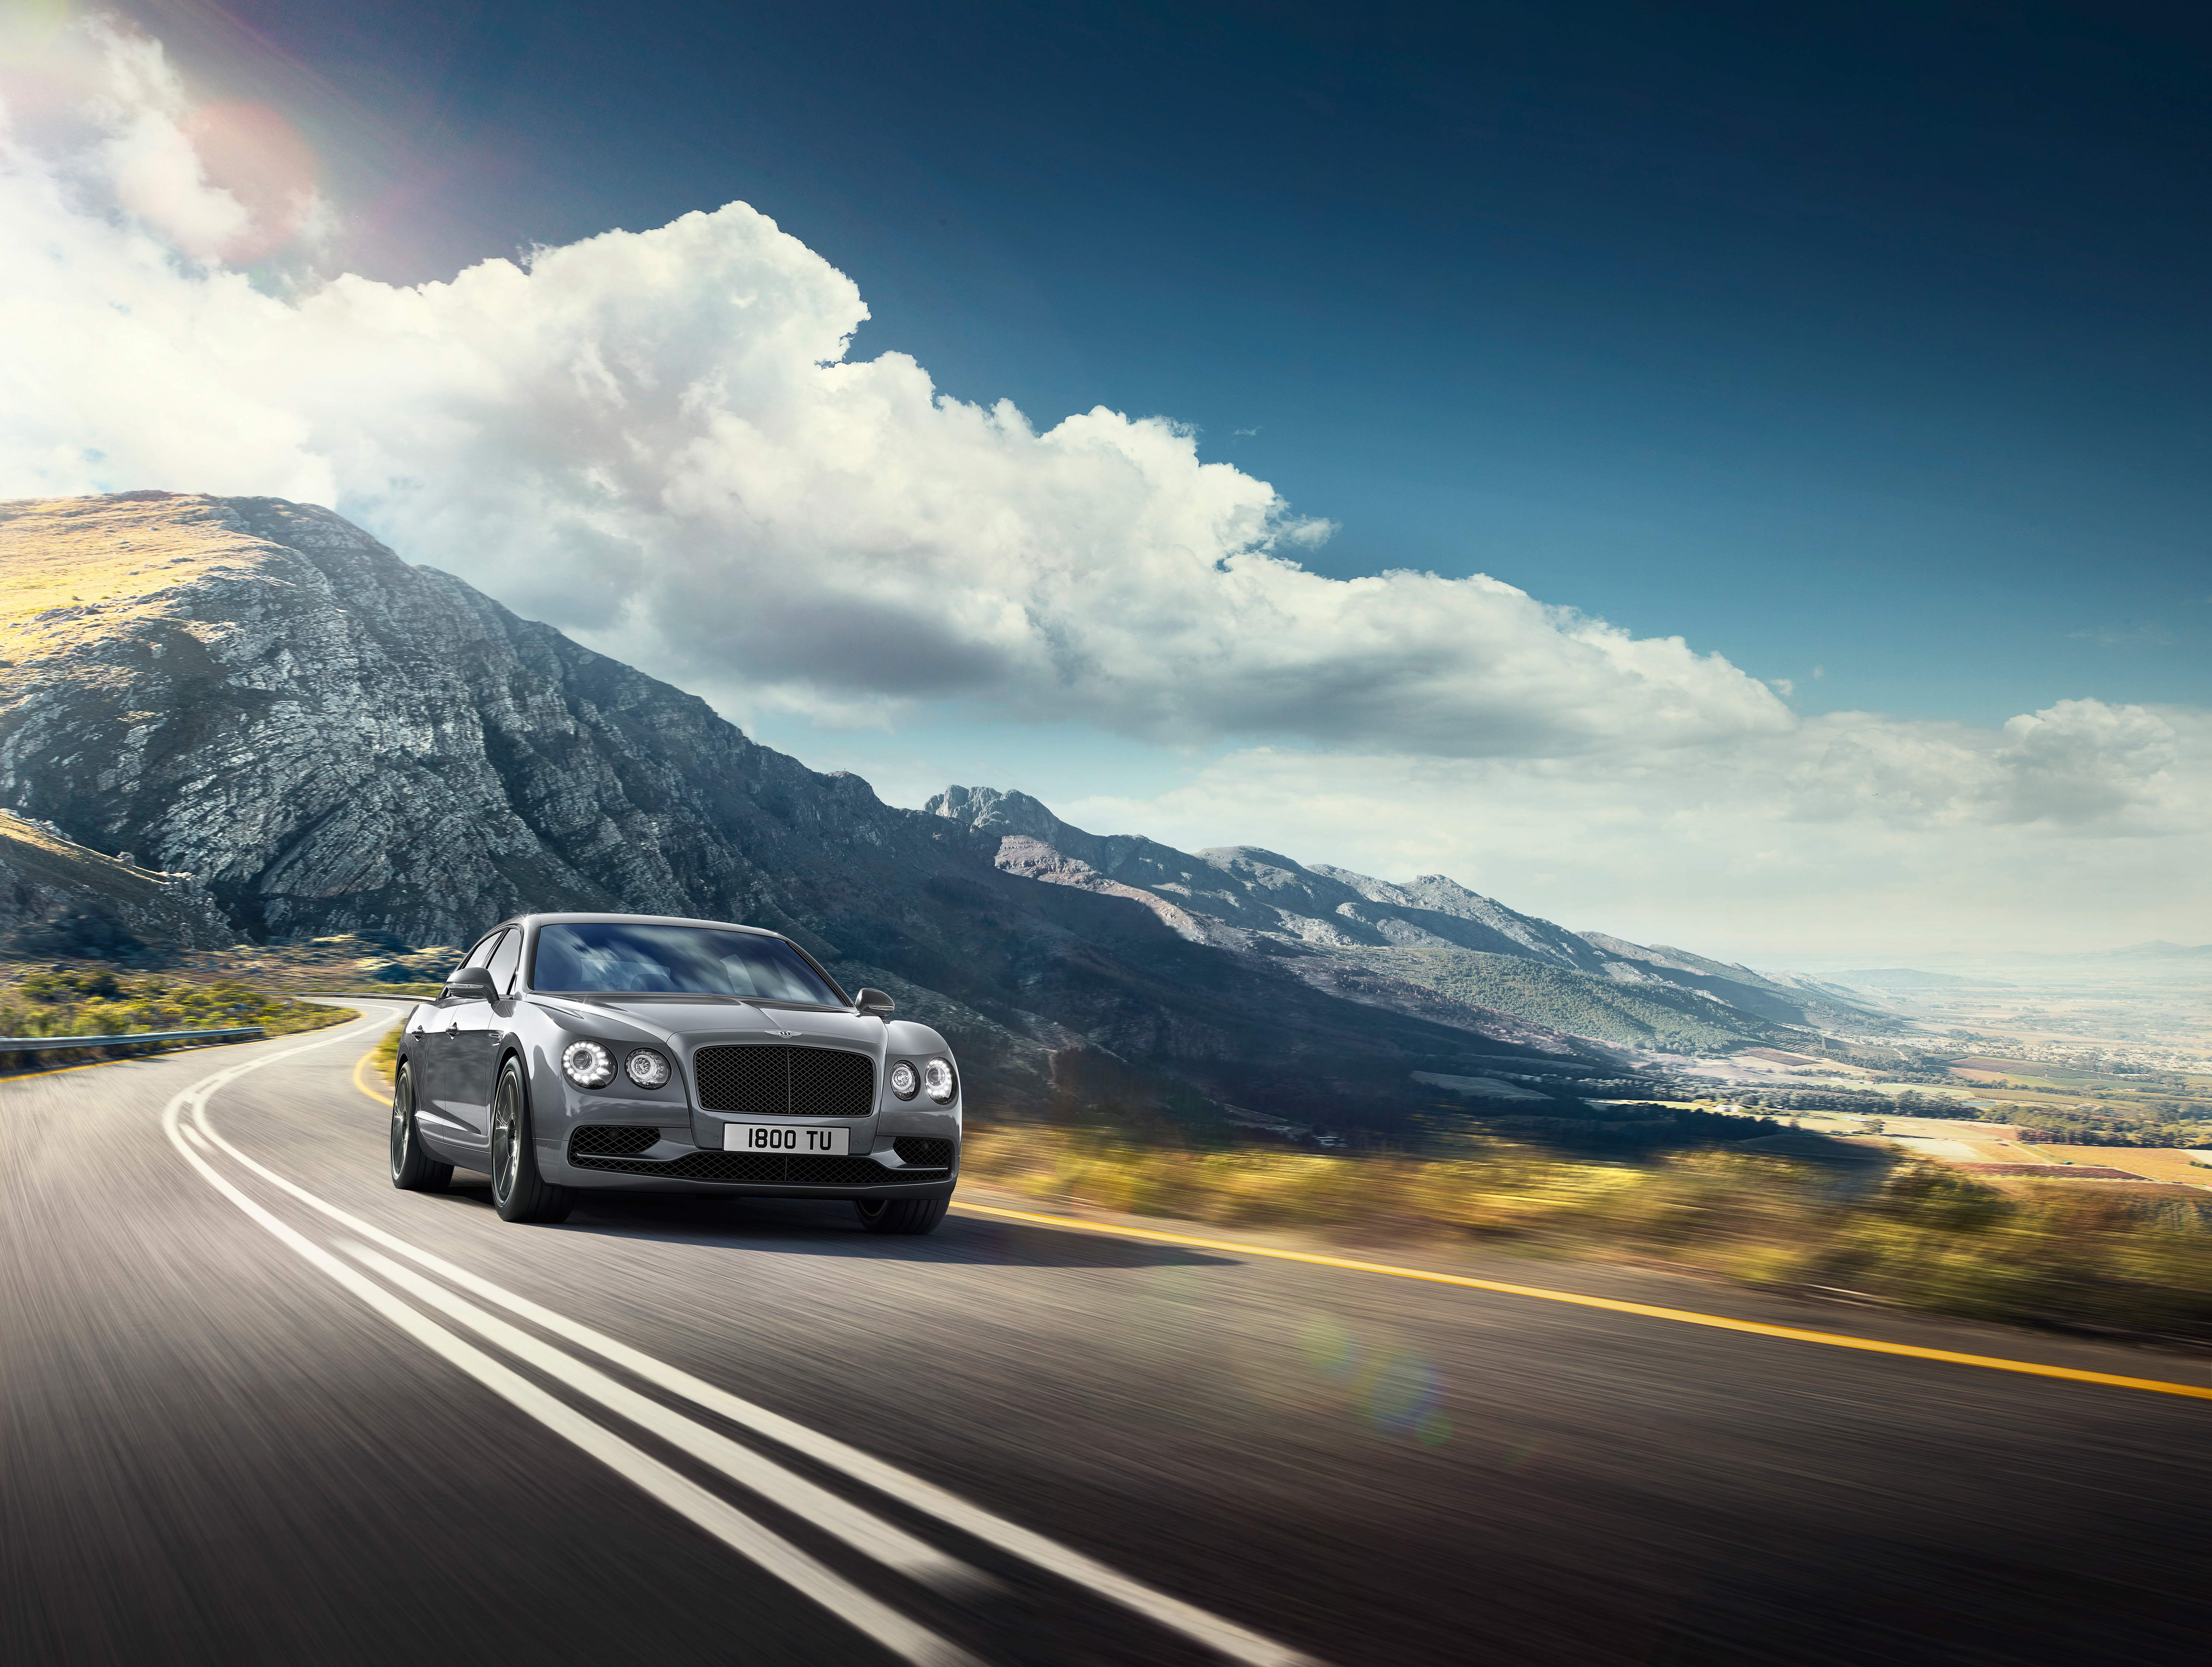 We Drive the Bentley Flying Spur W12 S